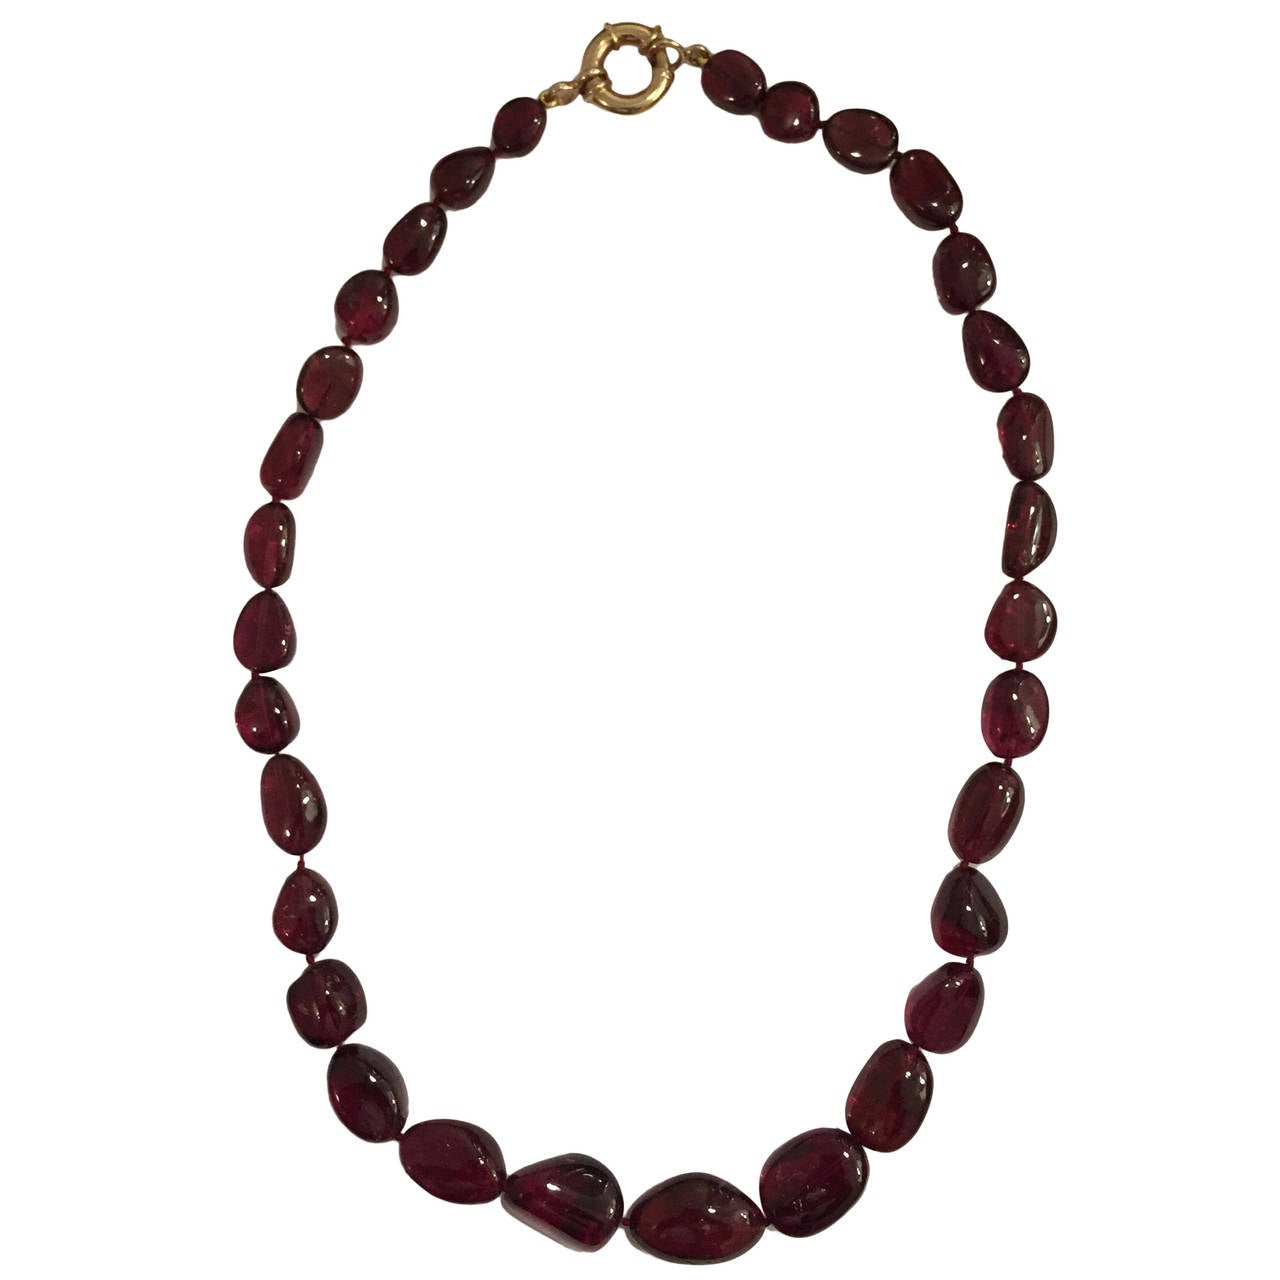 Elegant Rubelite Bead Necklace with a Gold clasp